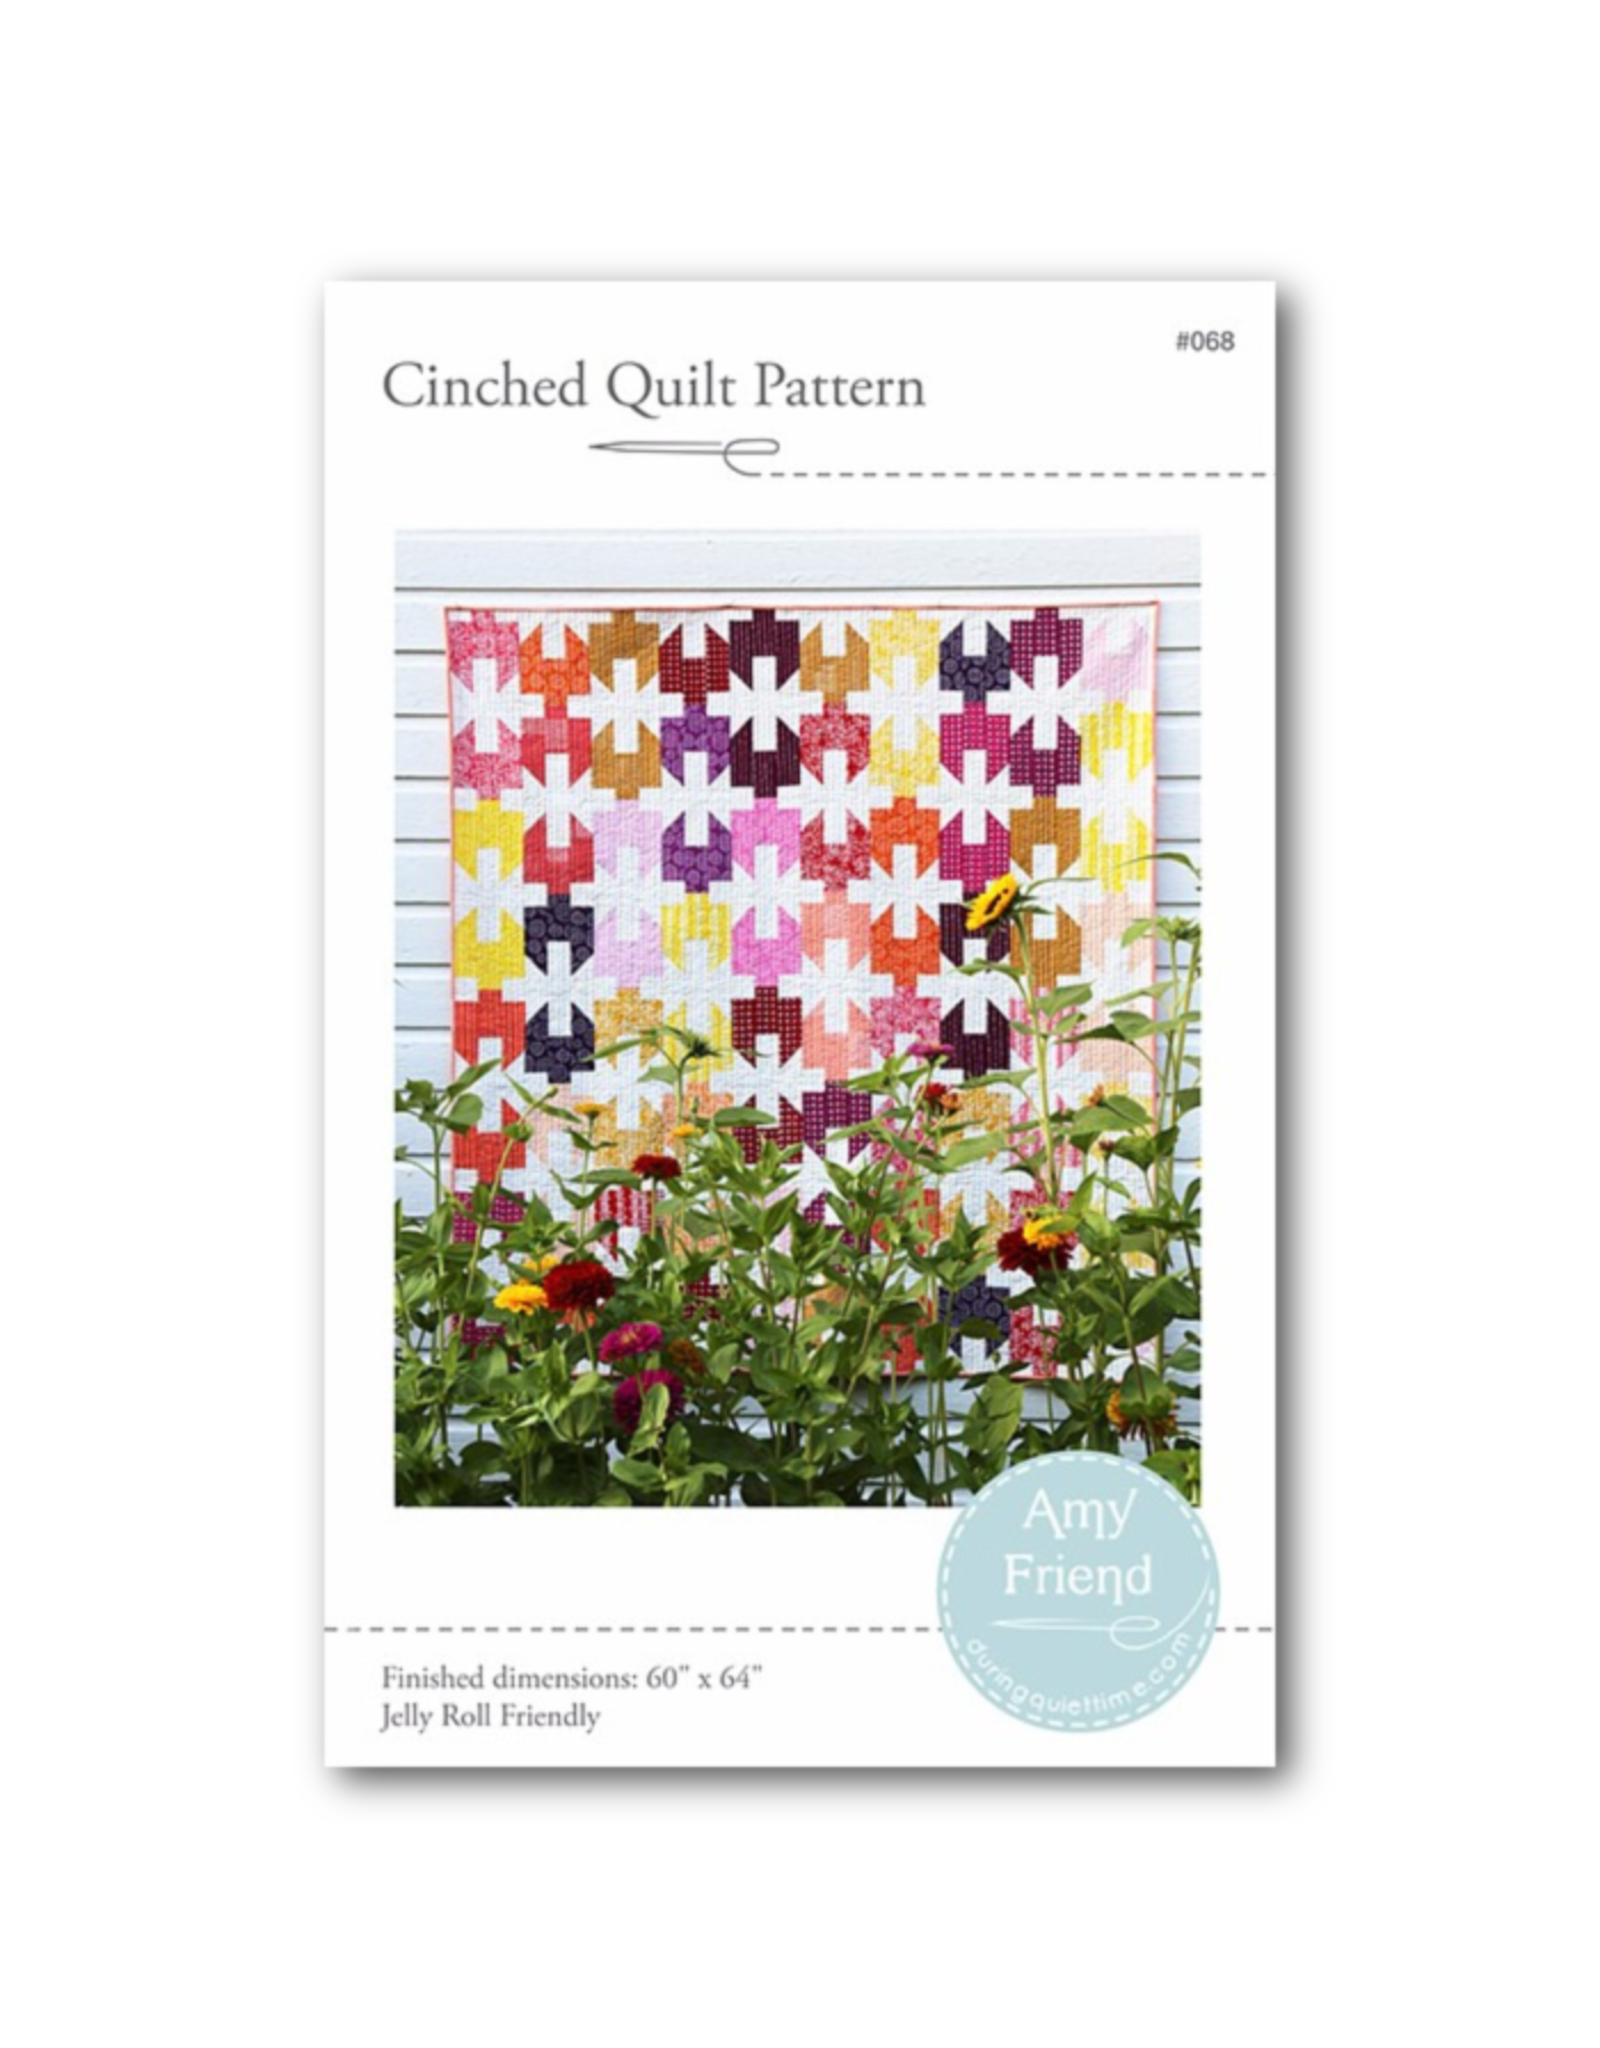 Amy Friend Cinched Quilt Pattern